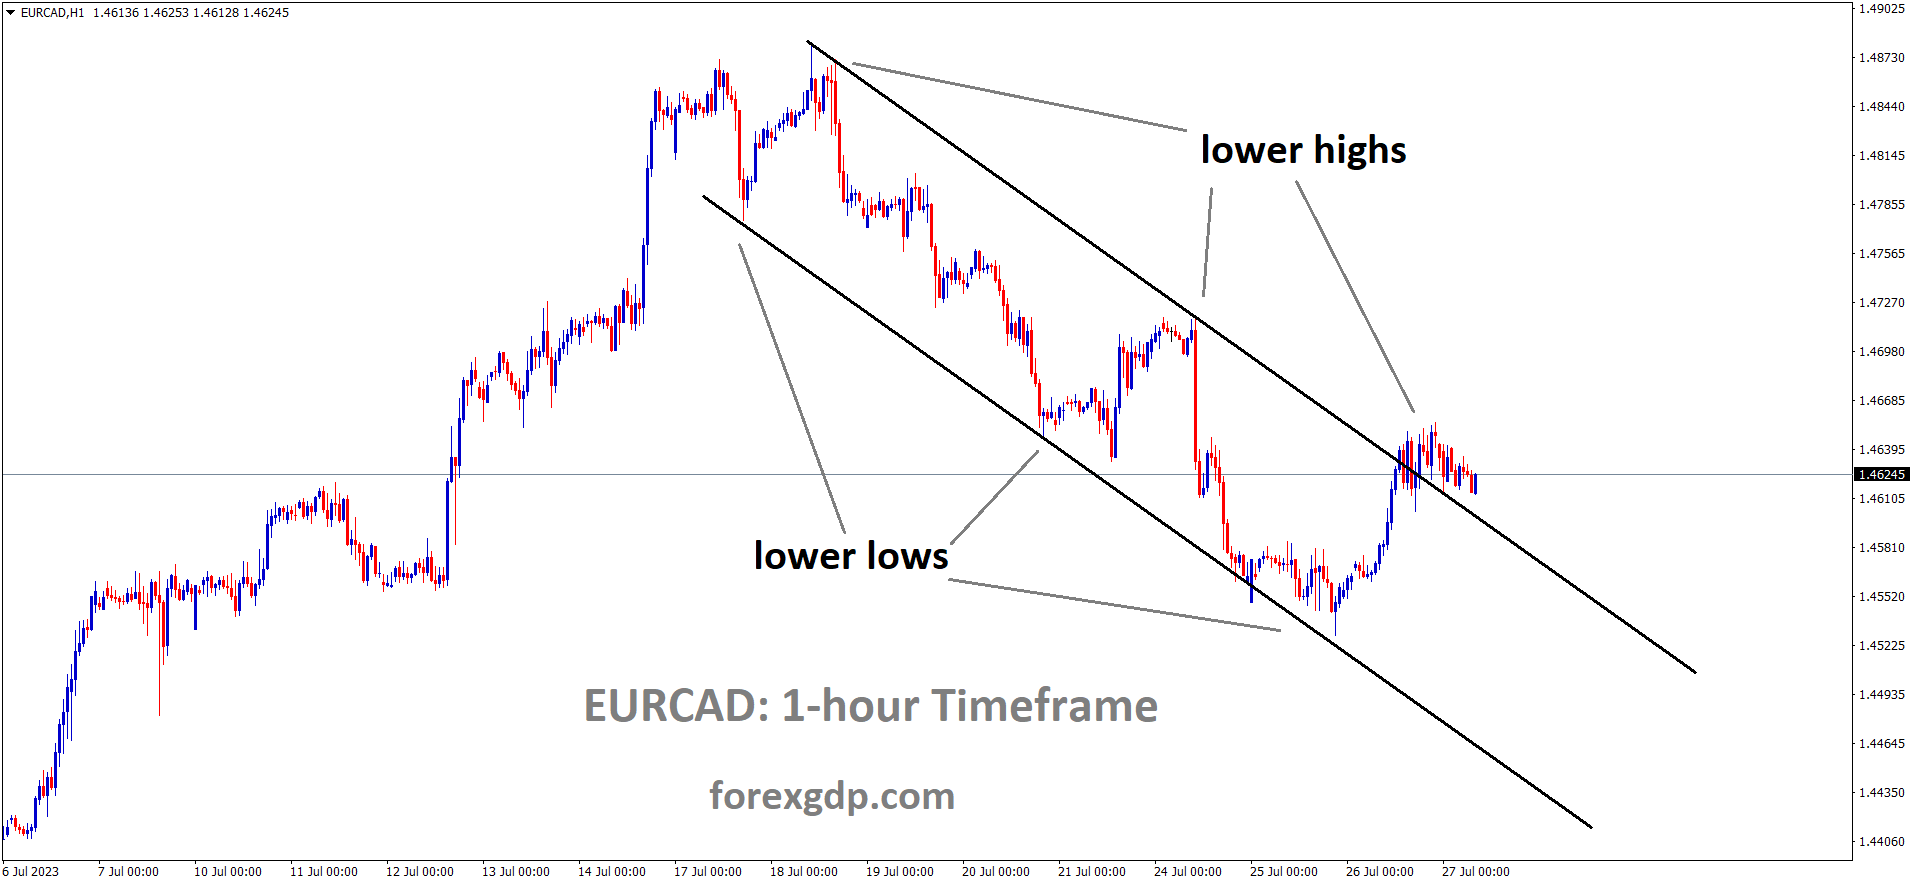 EURCAD H1 TF analysis Market is moving in the Descending channel and the market has reached the lower high area of the channel